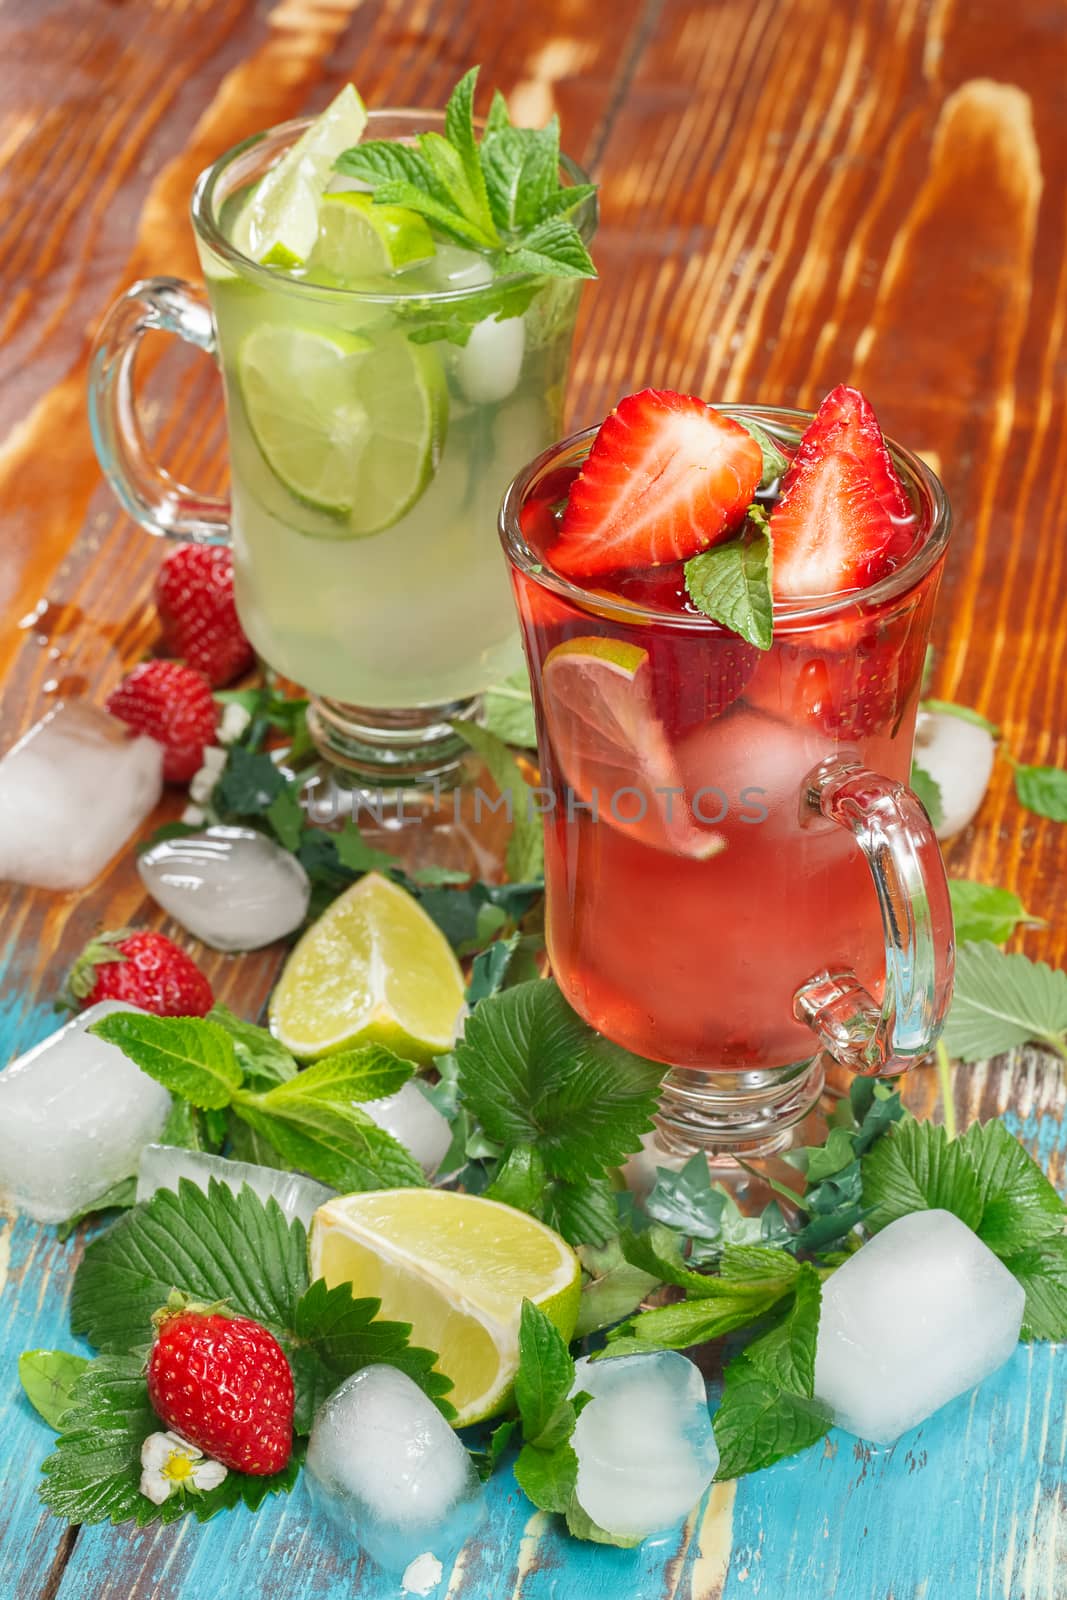 Strawberry and lime mojito by Slast20